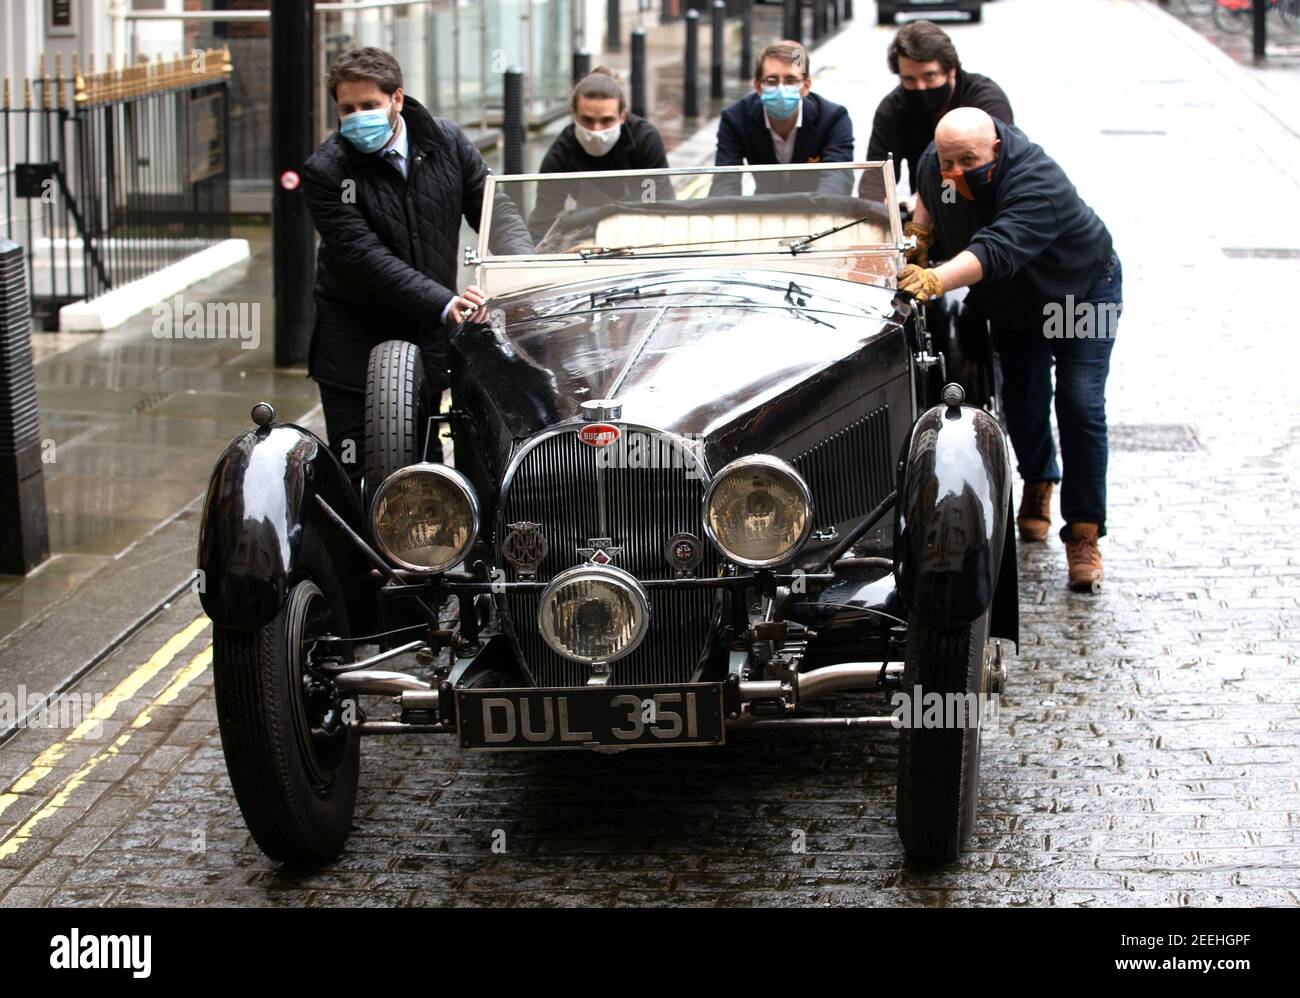 London, UK 16 Feb 2021 Bonhams staff wheel the Bugatti into the showroom. 1937 Bugatti Type 57S offered for the first time ever at auction, estimate £5-7 Million. This classic car will lead an extraordinary sale of exceptional motor cars at Bonhams' flagship saleroom in London on 19 February 2021. Nicknamed ‘Dulcie' due to its registration number ‘DUL 351' - it has been stored in the garage of its late owner, respected engineer Bill Turnbull, since 1969, and is now offered as an unfinished project, at no reserve. Estimate £5,000,000 - 7,000,000. The Bugatti will form the centrepiece of the Stock Photo